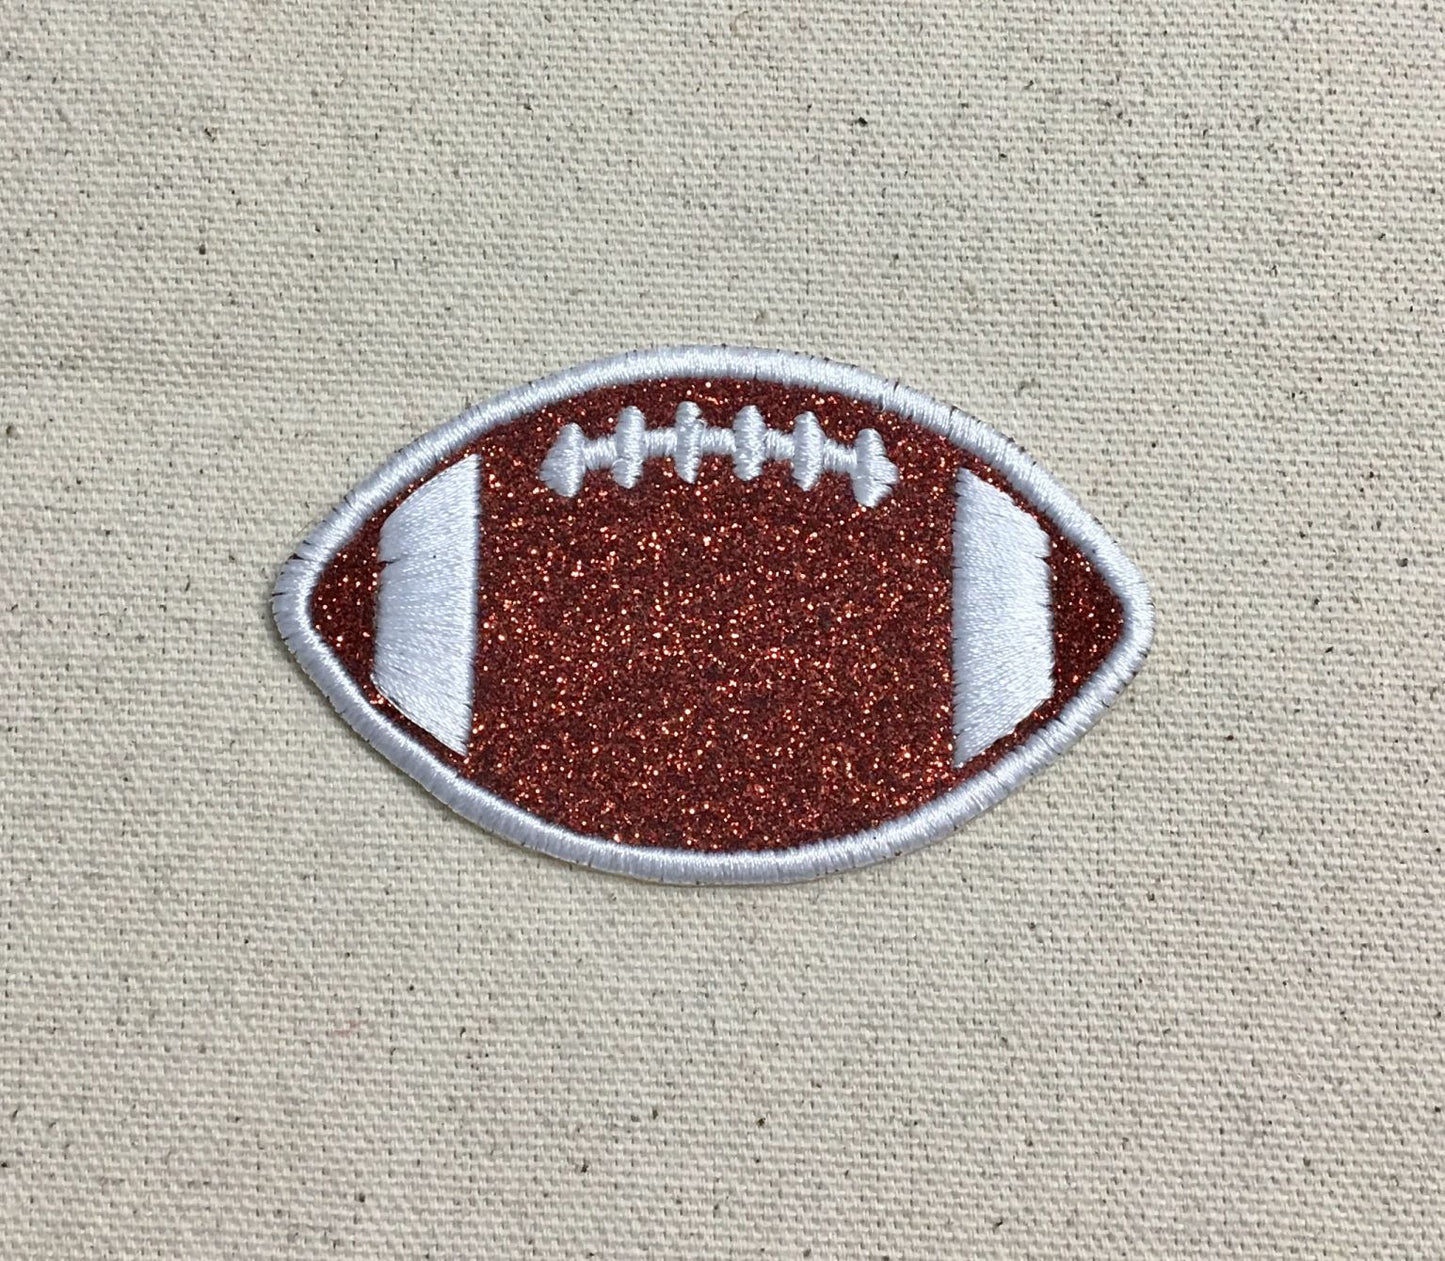 Football - Brown Glitter - White Outline/Stitches - 2", 3", 4" or 5" - Sports - Iron on Applique - Embroidered Patch